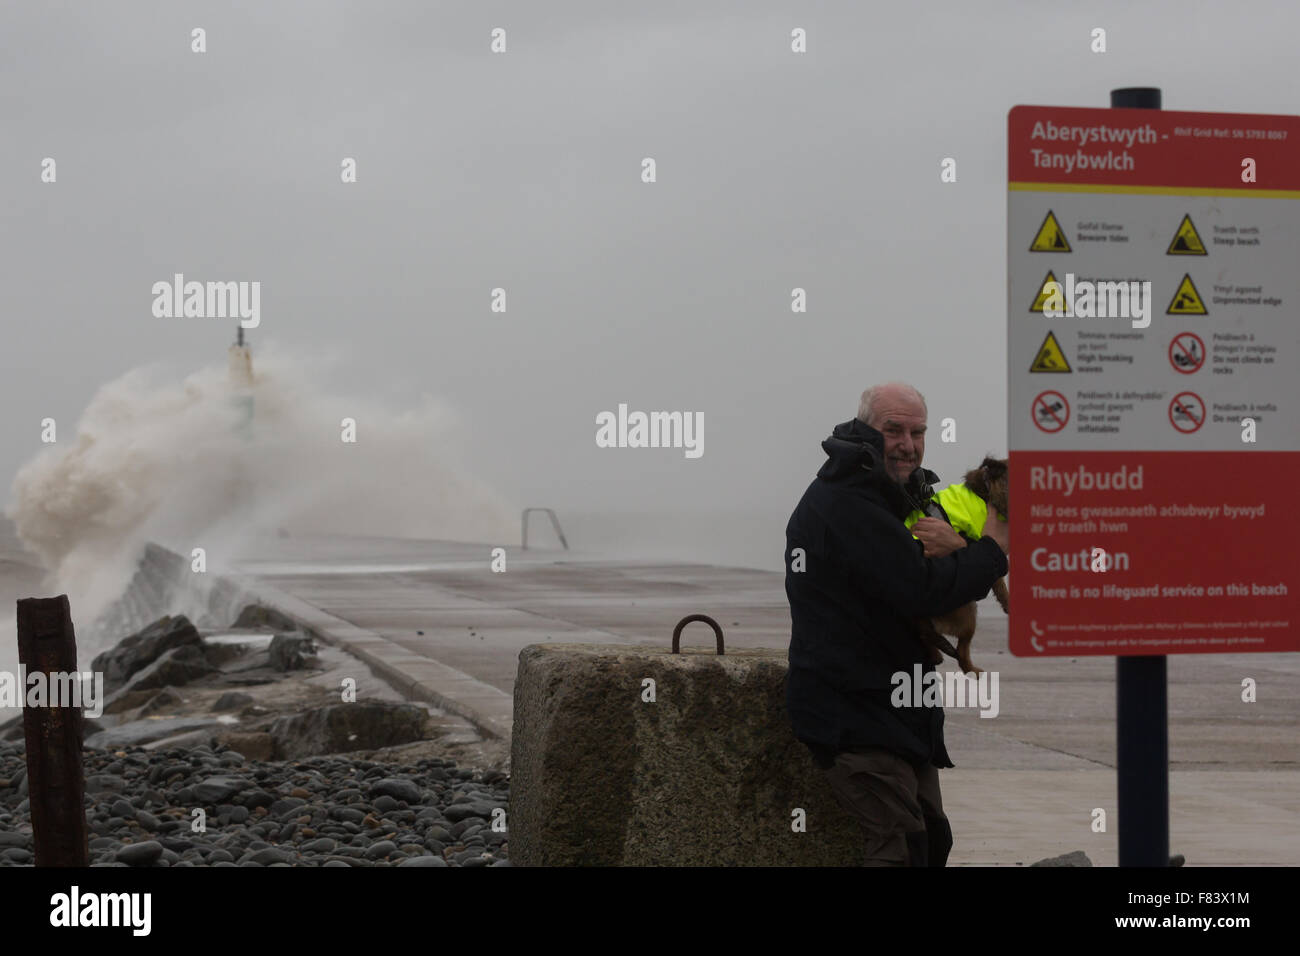 Wales, UK. 05th December 2015 Storm Desmond, the 4th named recent storms brings gale force winds and rough seas to Aberystwyth, battering the jetty near the harbour entrance on the west coast of Wales. Credit:  Ian Jones/Alamy Live News Stock Photo